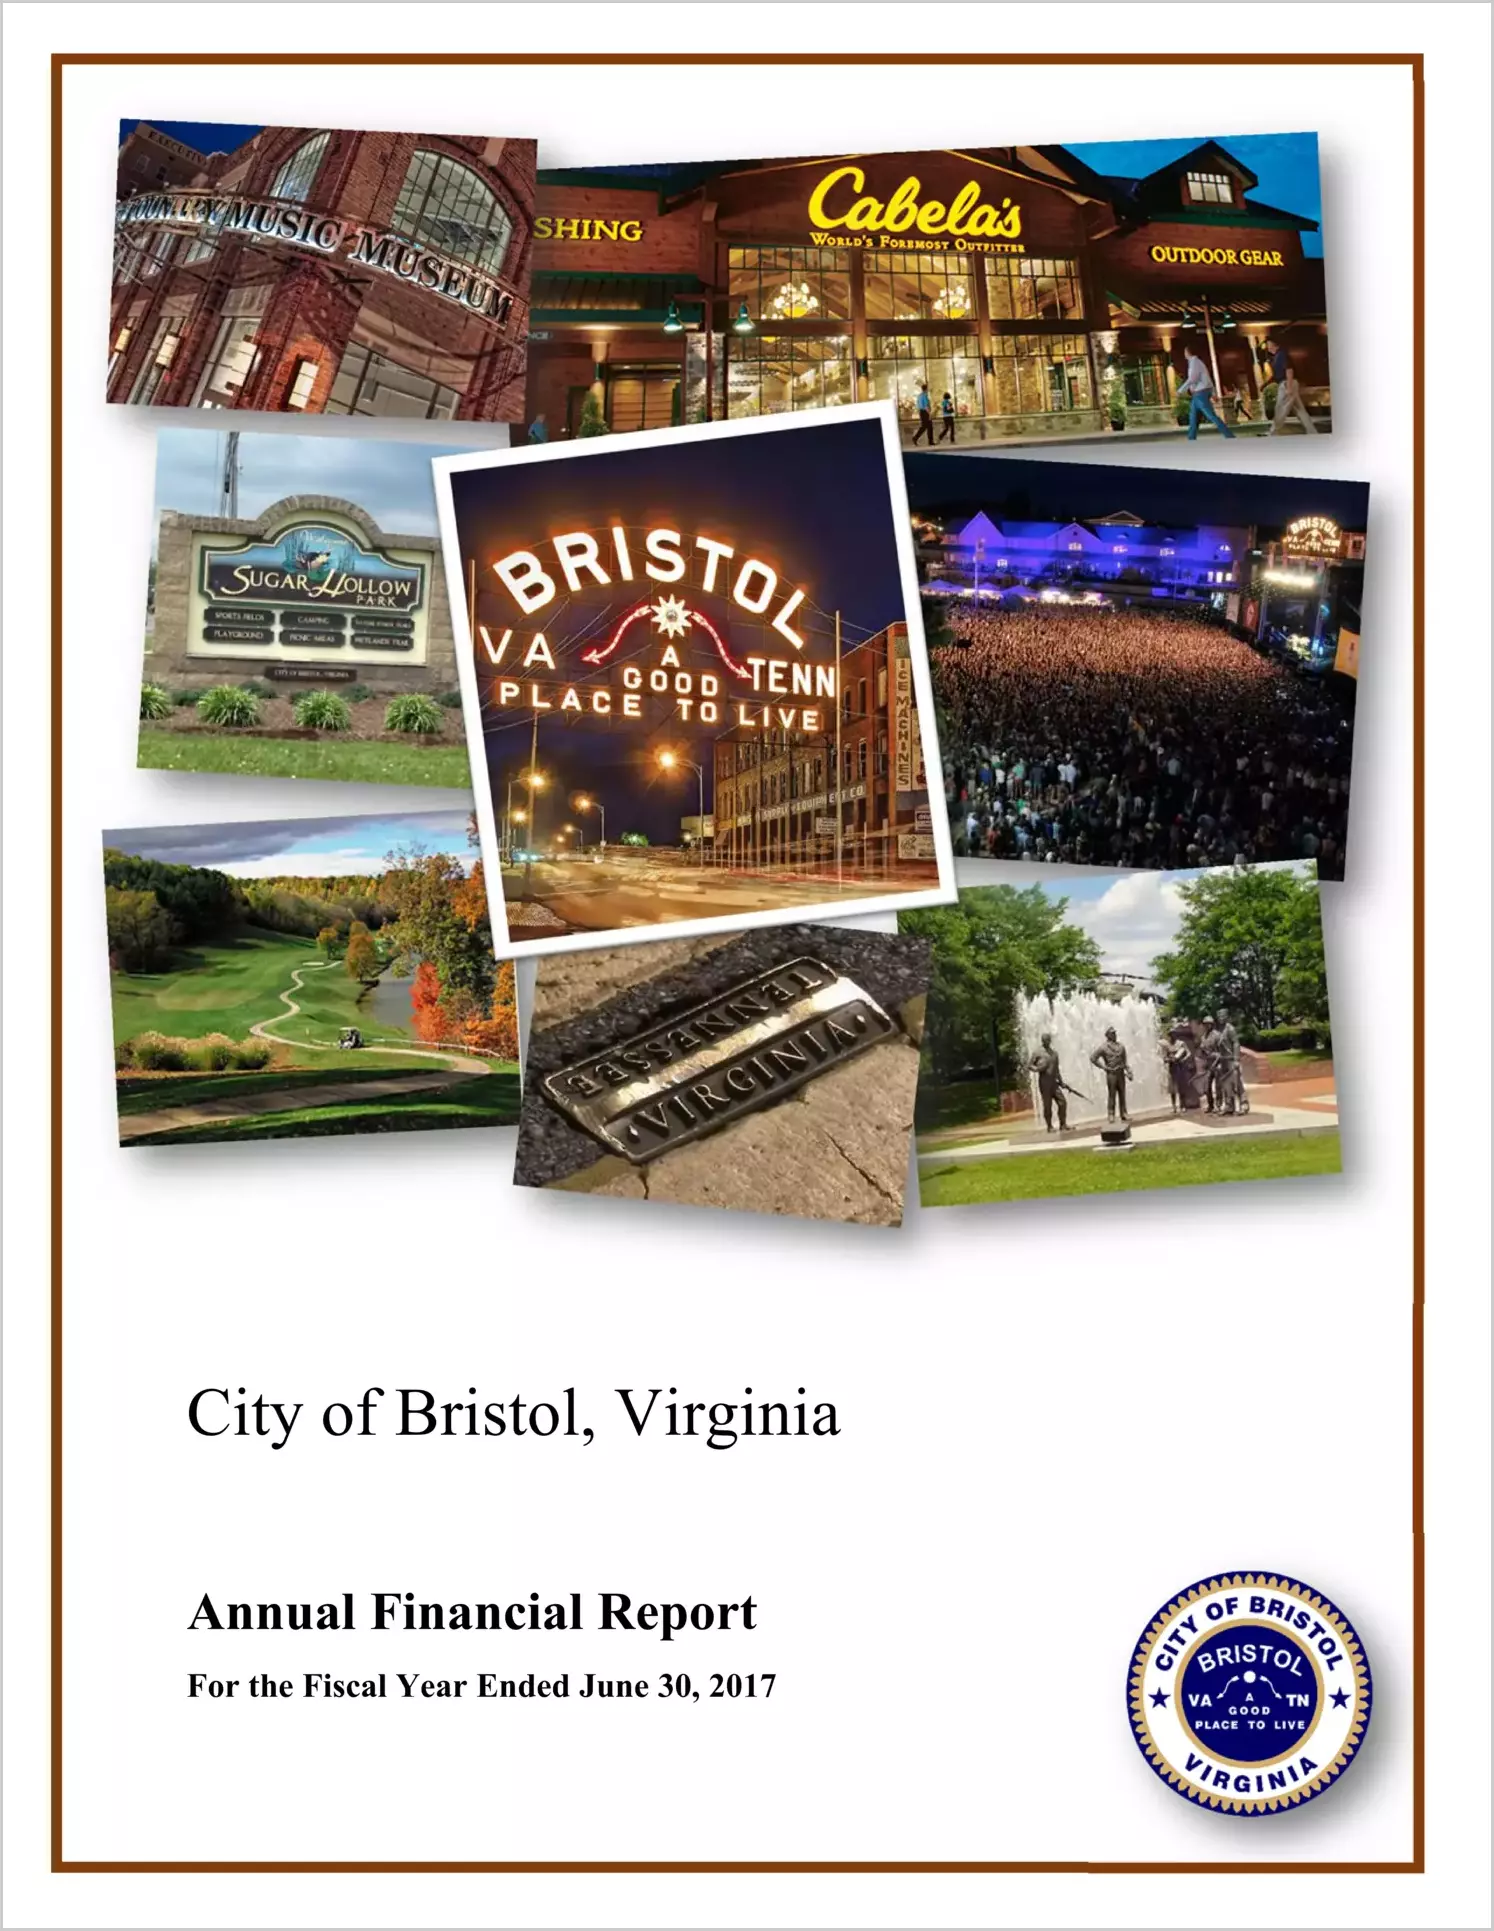 2017 Annual Financial Report for City of Bristol